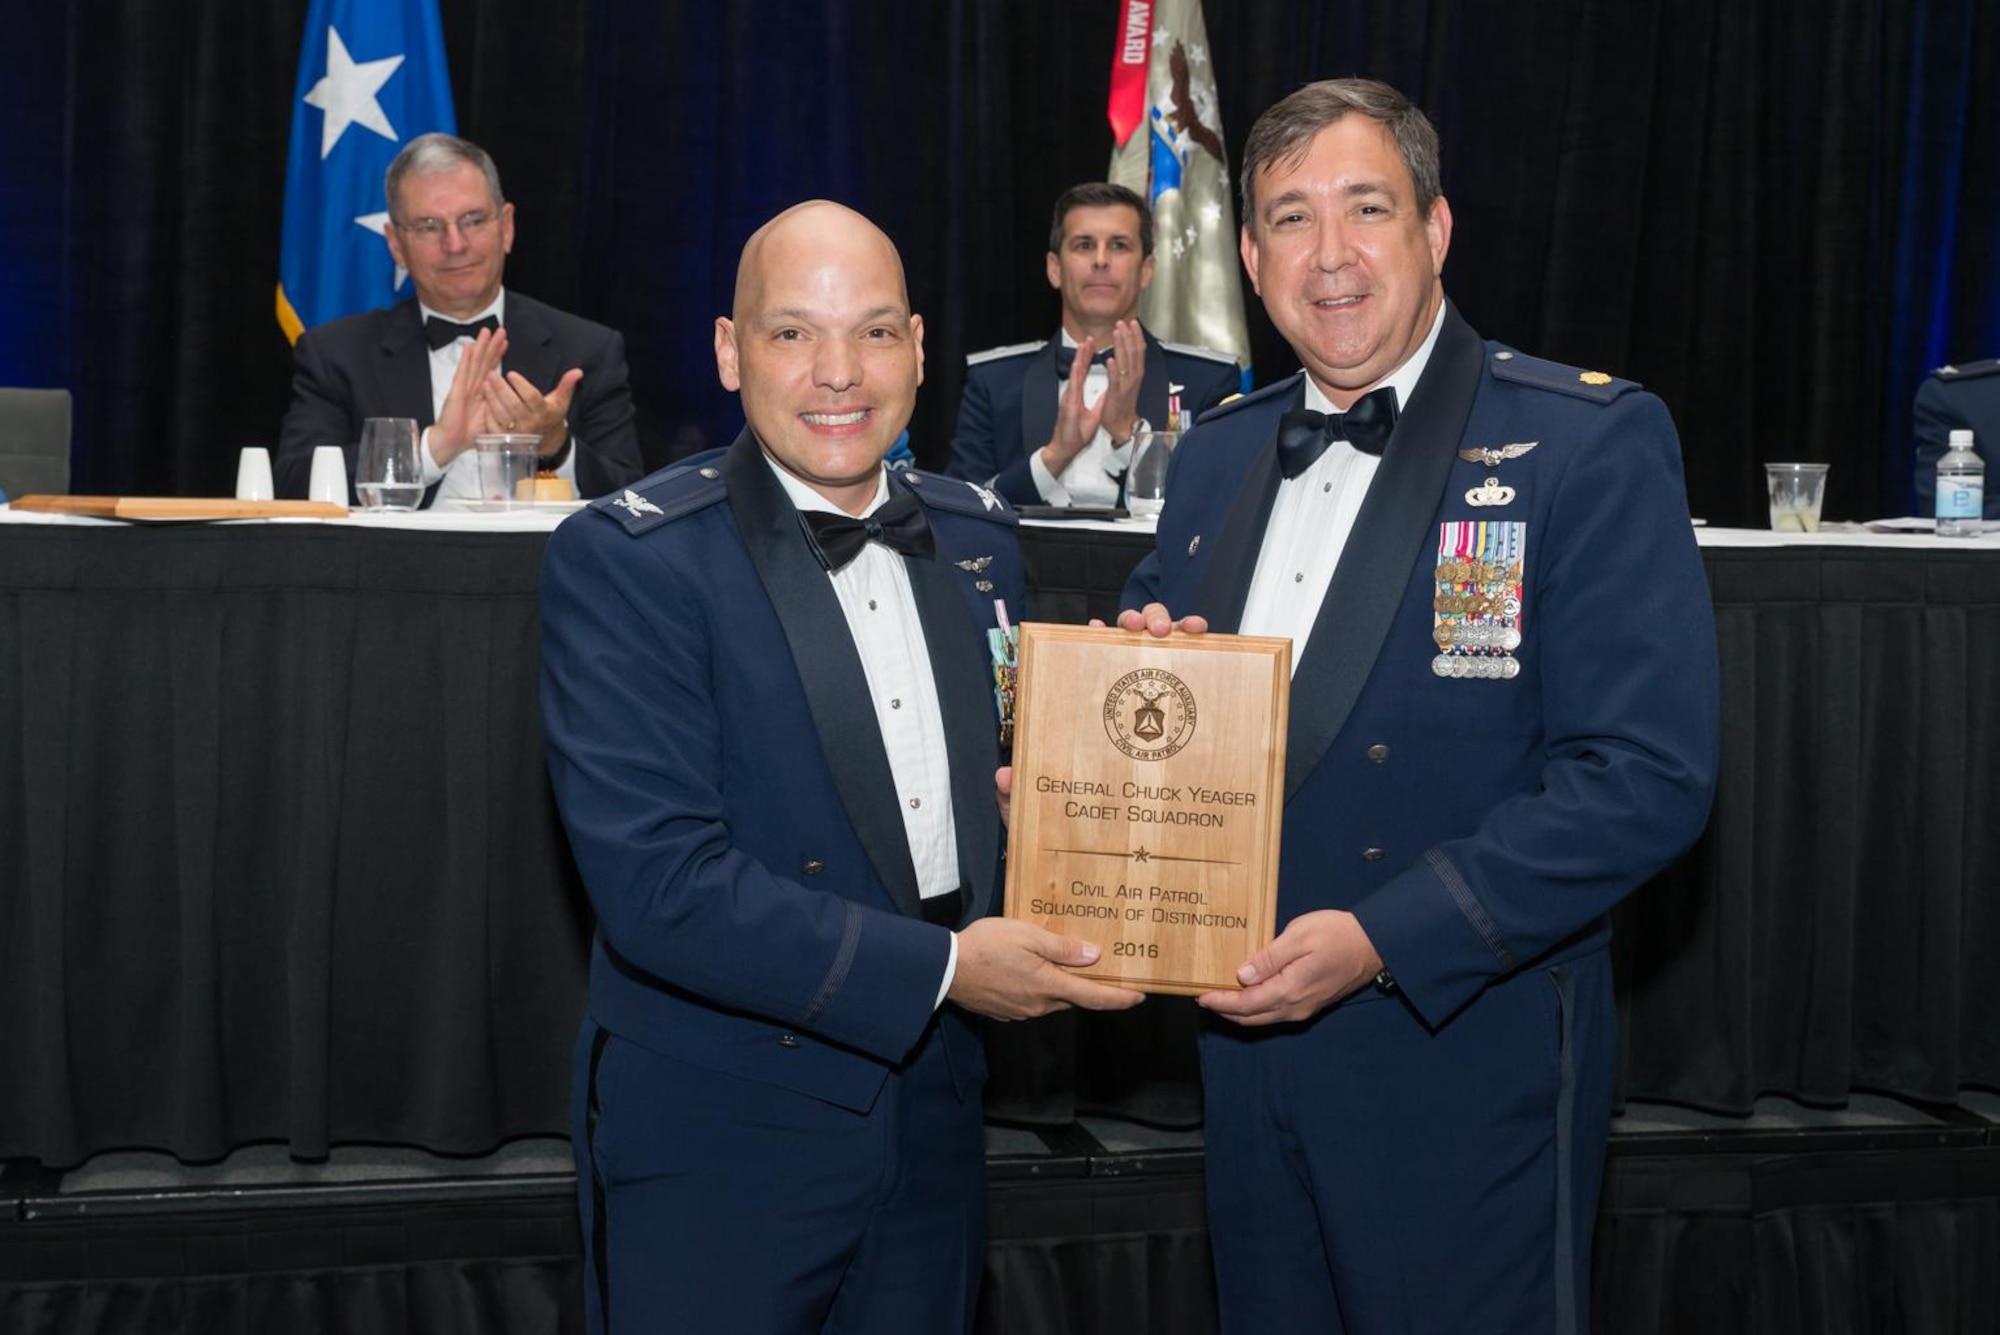 Civil Air Patrol Major Keith Barry, right, the squadron commander with the Civil Air Patrol General Chuck Yeager Cadet Squadron, receives the 2017 CAP Squadron of Distinction award for the southeast region during the Florida Wing Conference in Orlando, Fla., April 29, 2017. The southeast region consists of the wings in Florida, Alabama, Georgia, Mississippi, Tennessee, Puerto Rico and the U.S. Virgin Islands. (courtesy photo)